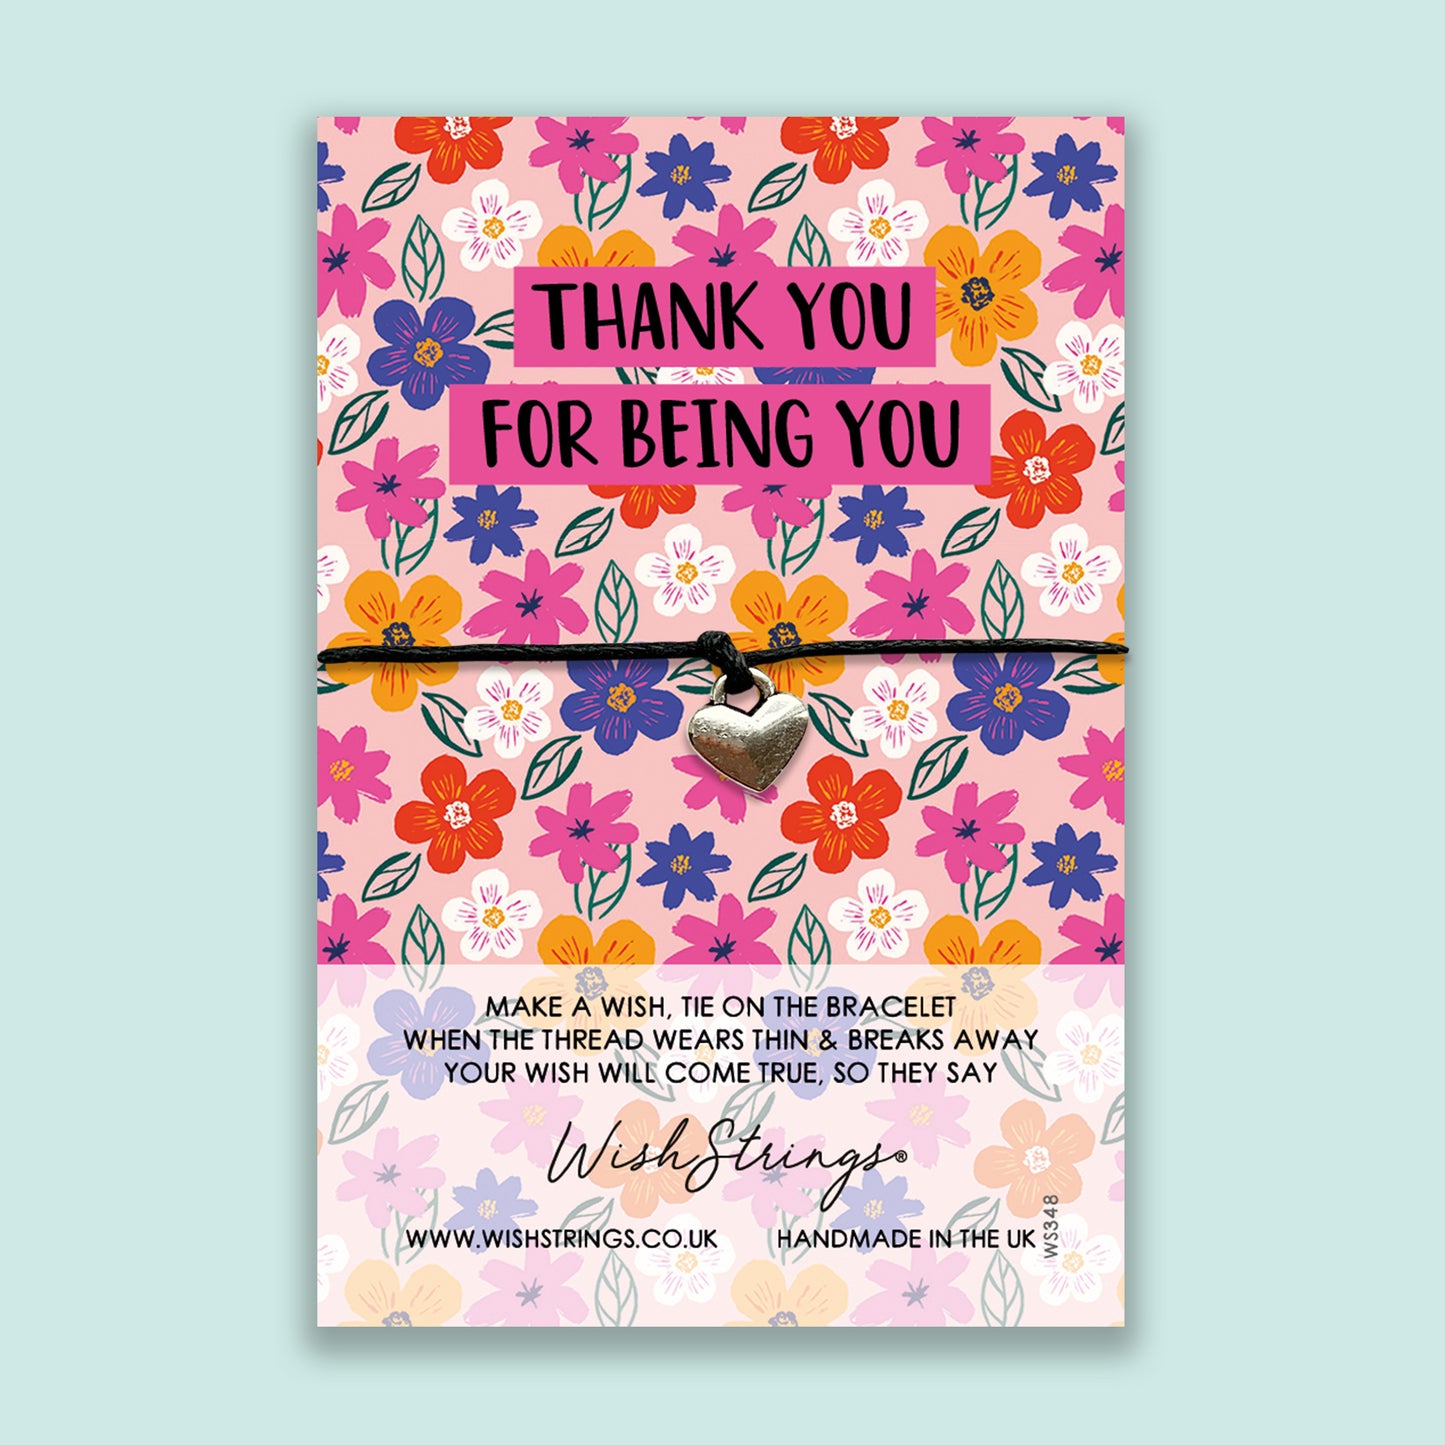 Thank You for Being You - WishStrings Wish Bracelet